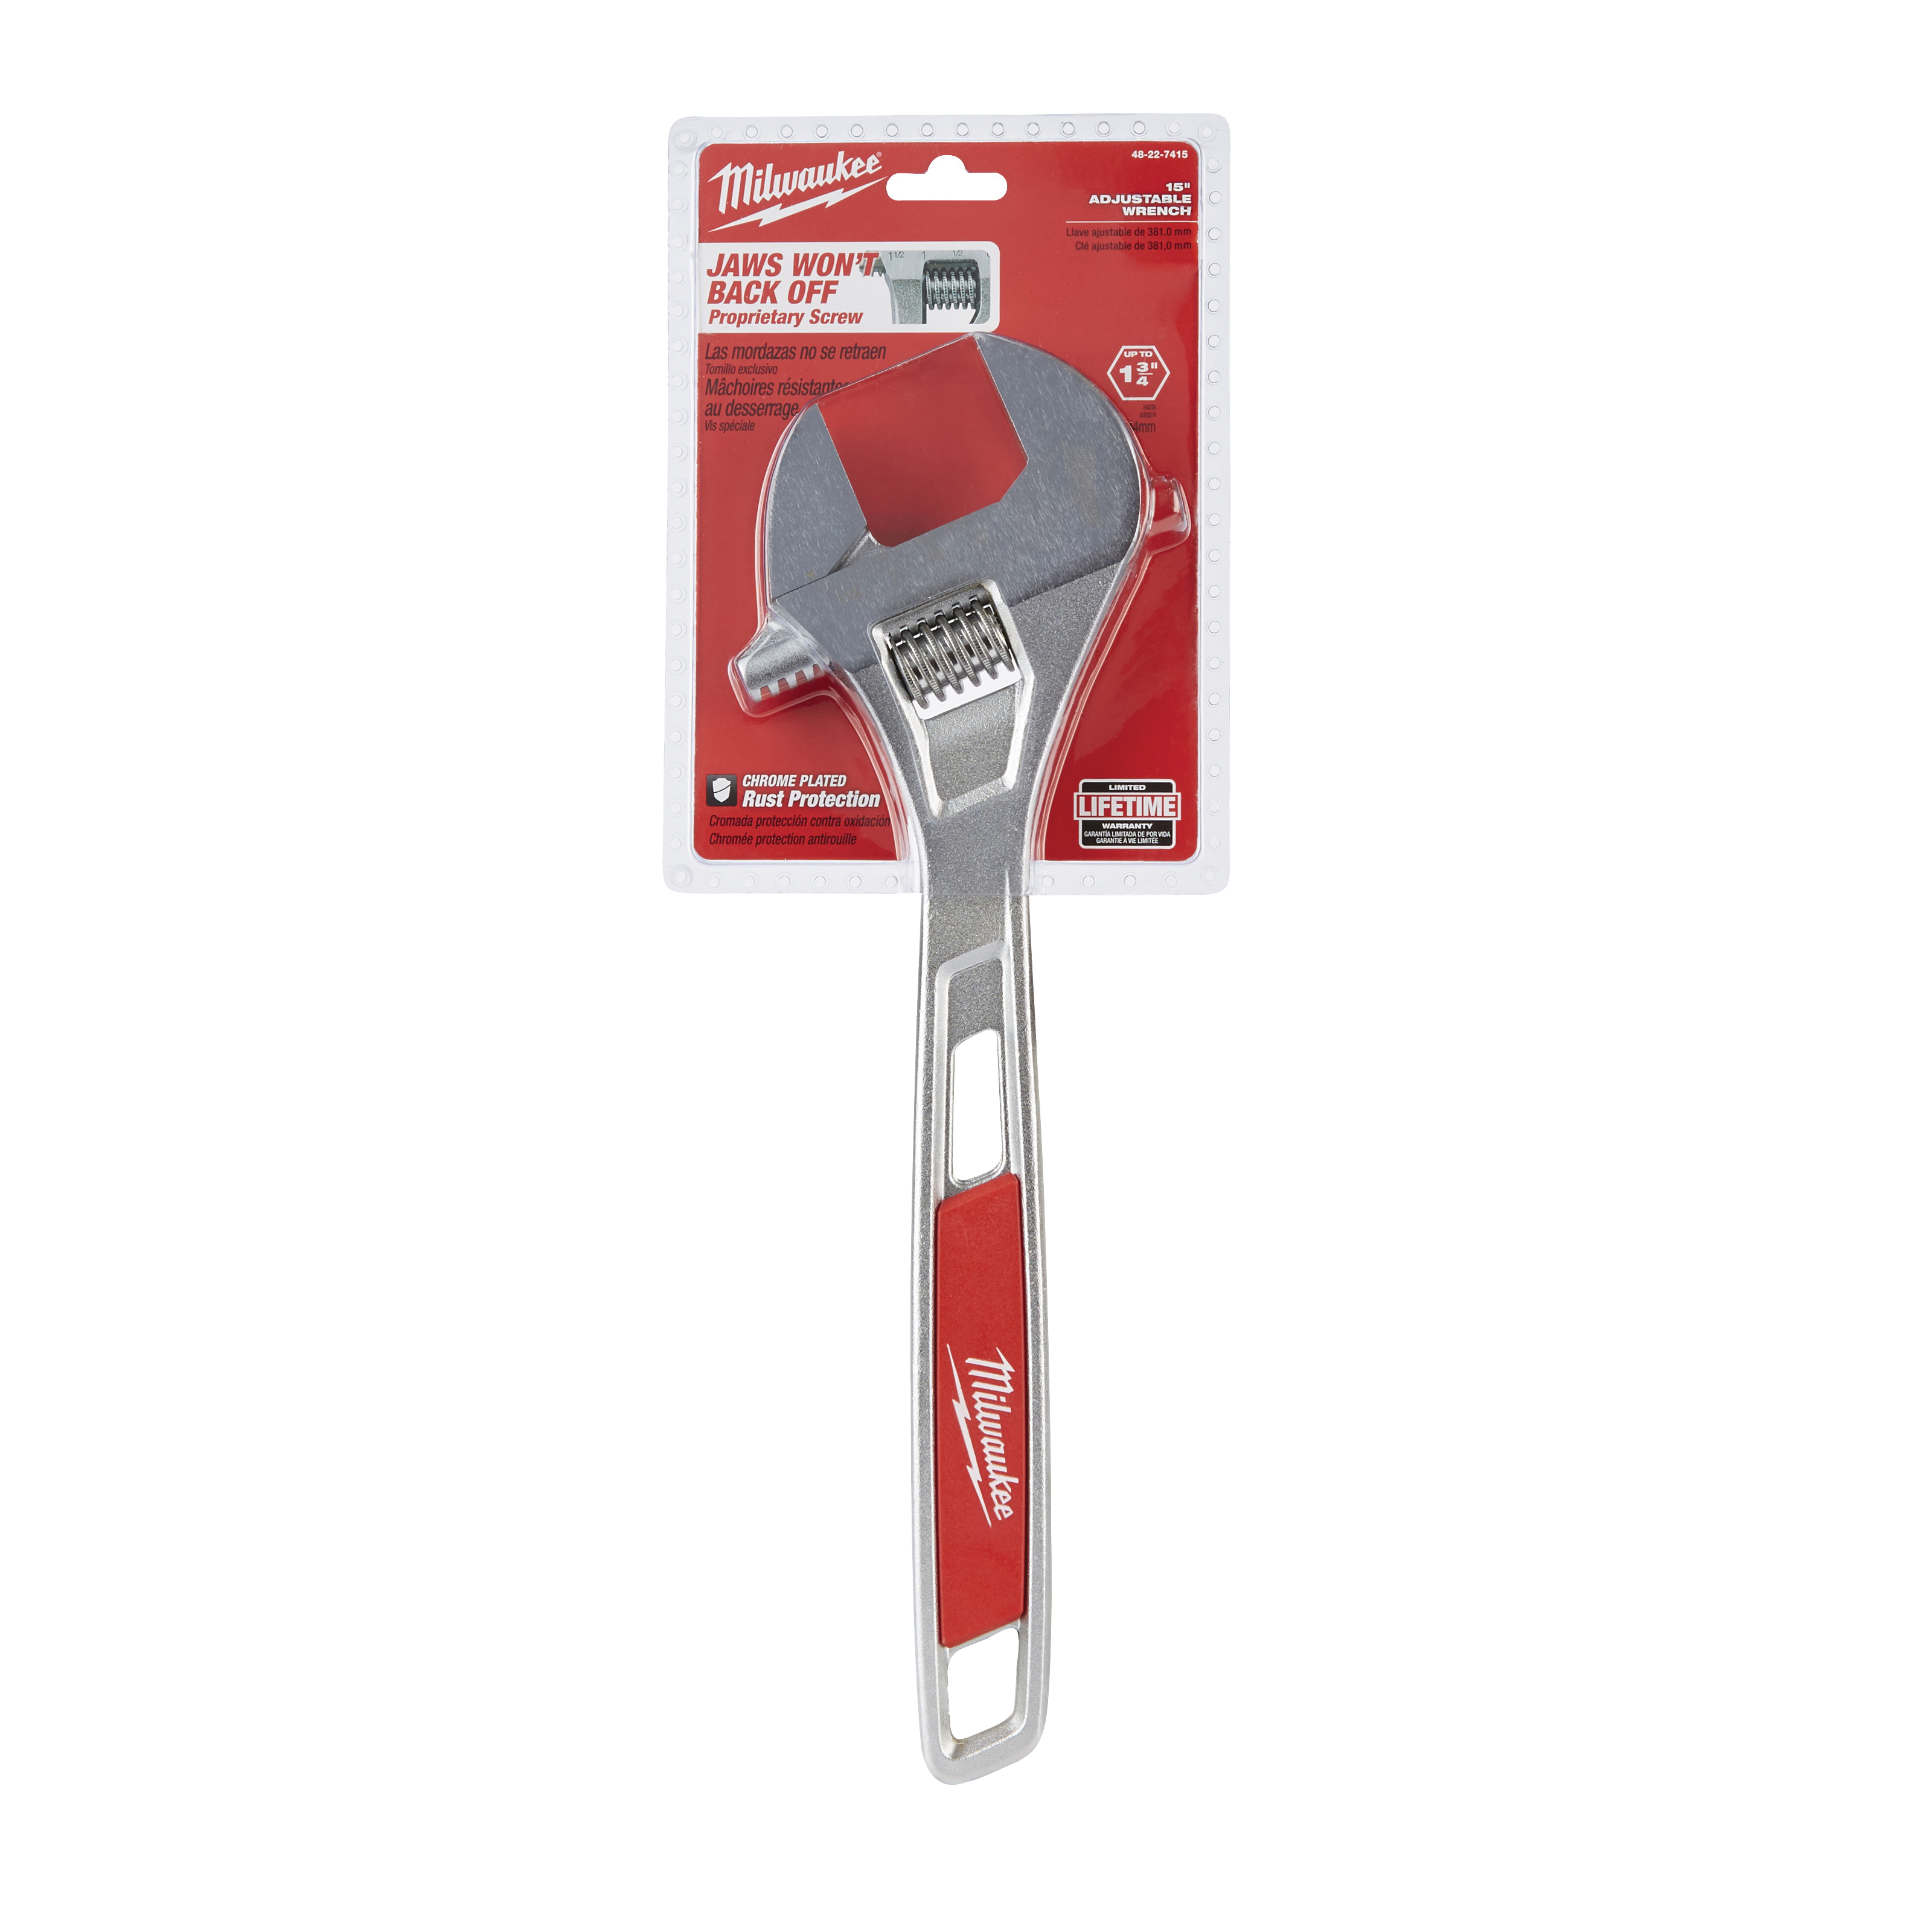 48-22-7415 Adjustable Wrench, 15 in OAL, 1-3/4 in Jaw, Steel, Chrome, Ergonomic Handle